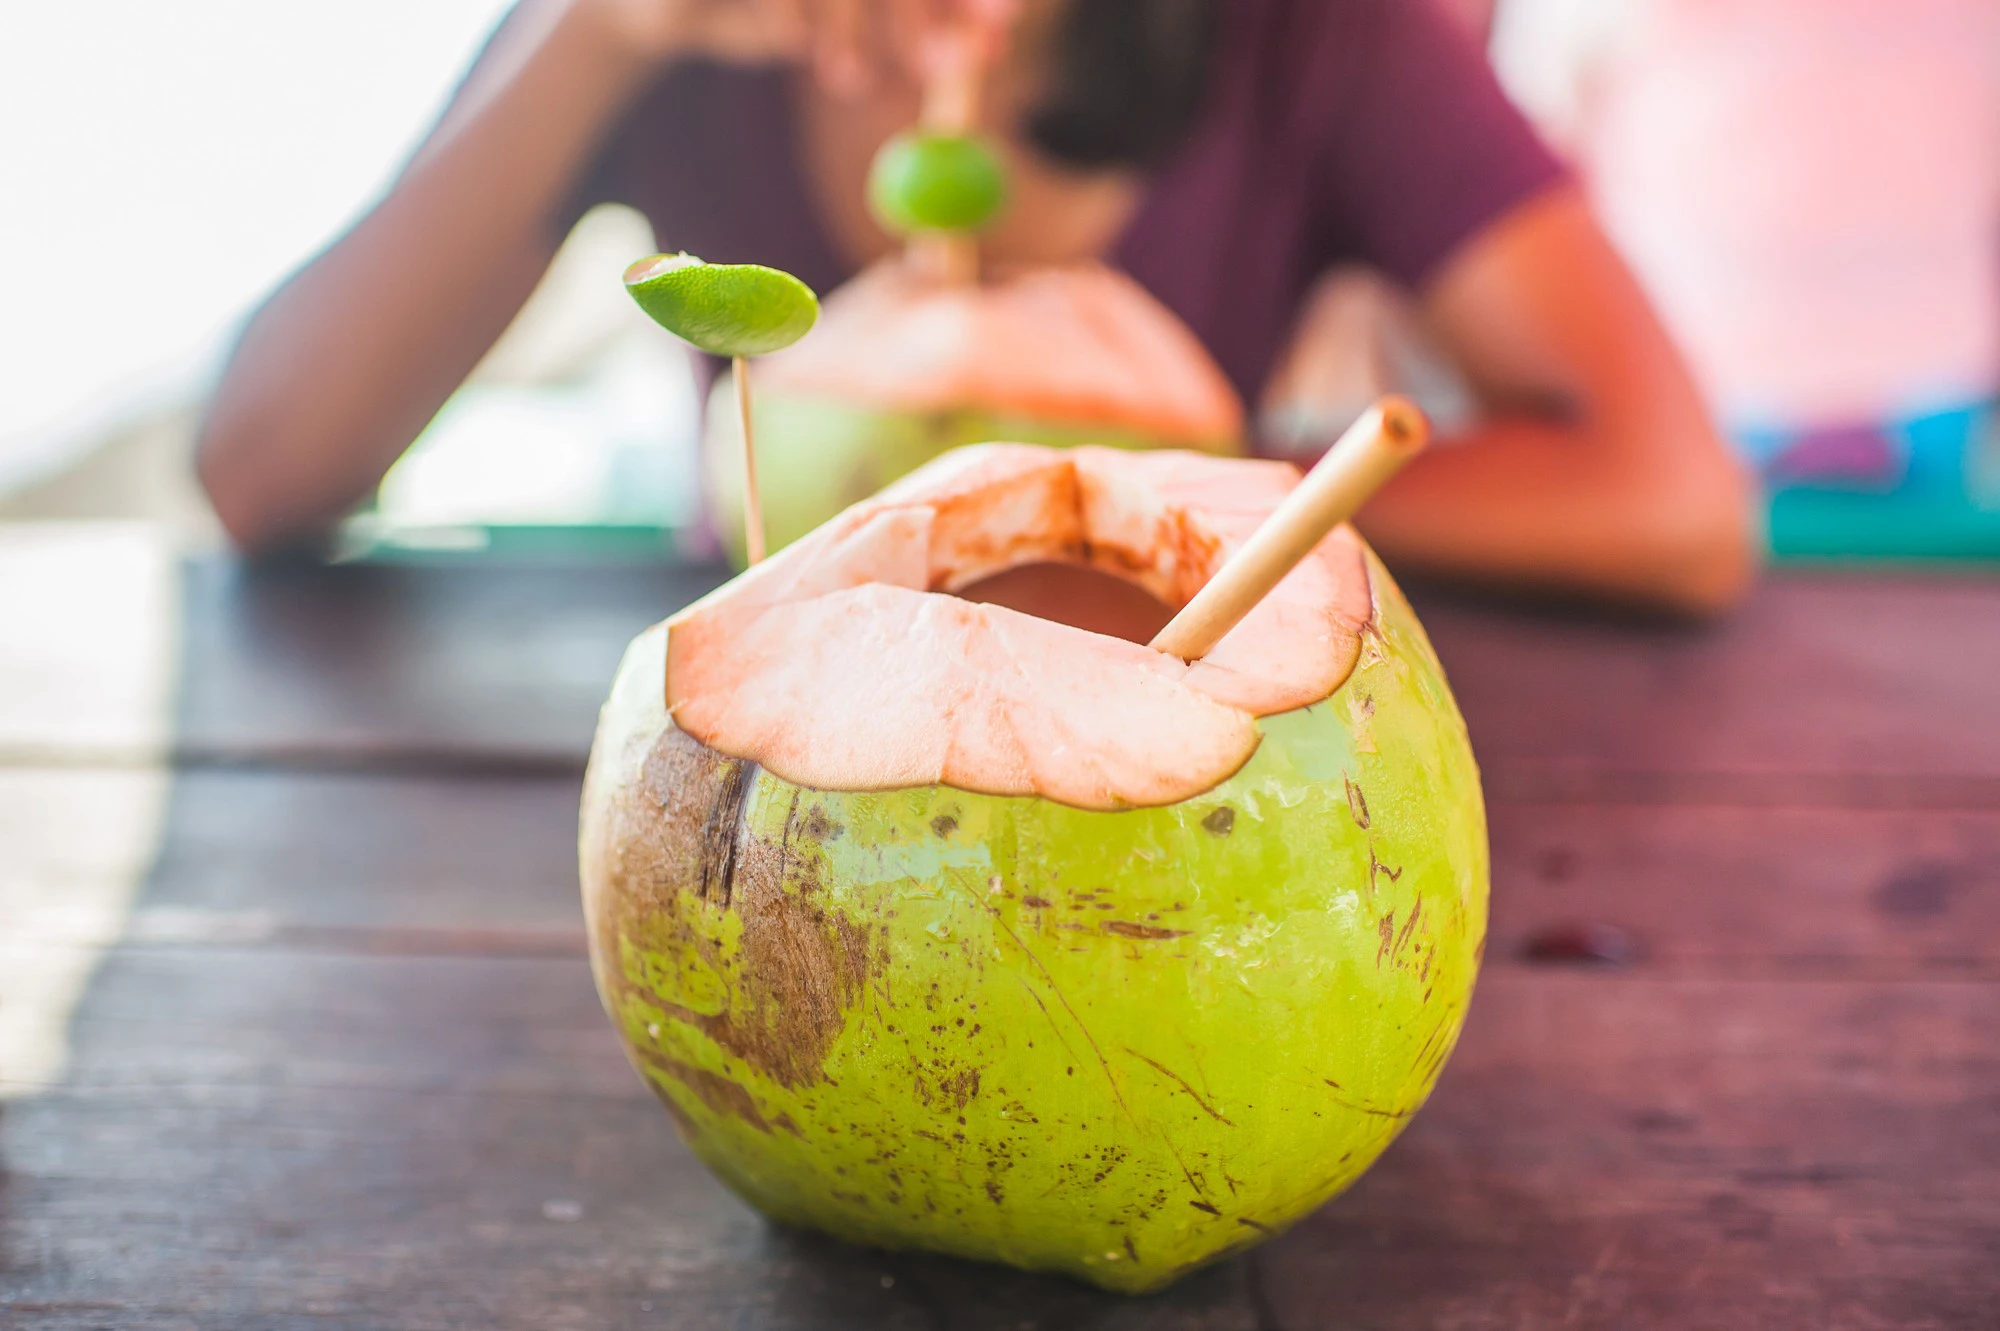 drink-fresh-young-coconut-with-bamboo-straw-royalty-free-image-998252978-1562924707.jpg